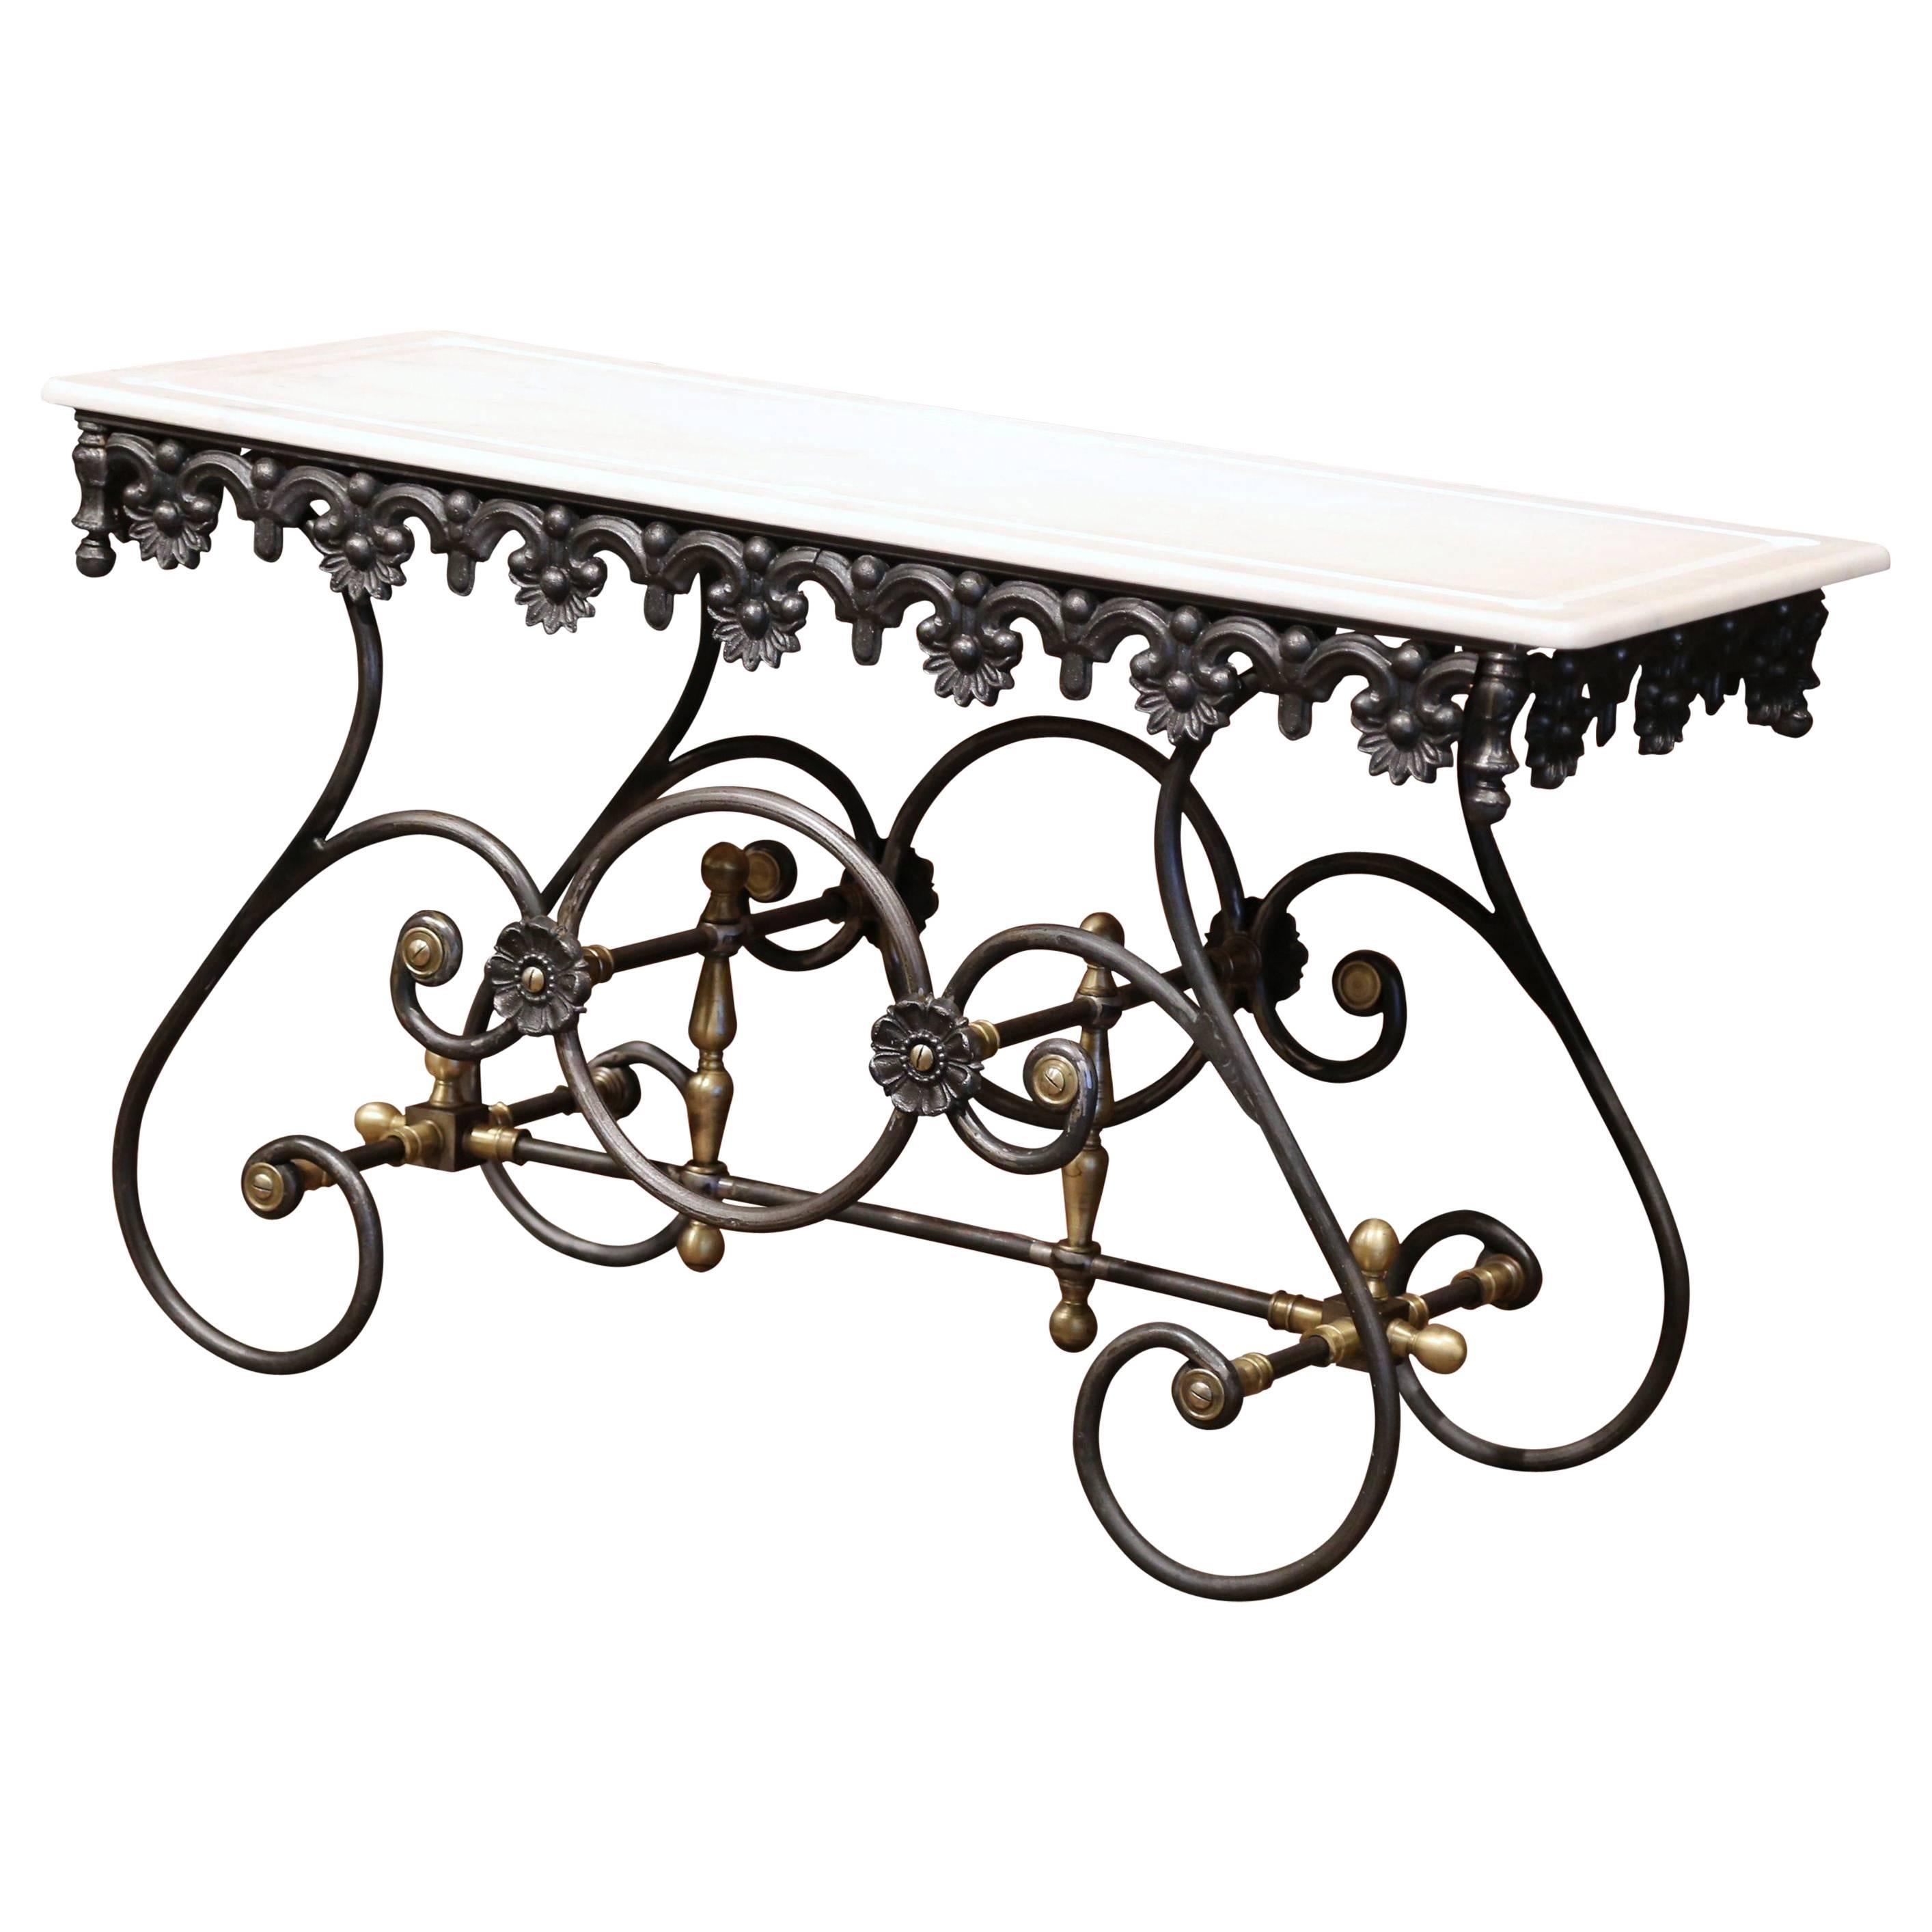 Polished Iron Butcher Pastry Table with Marble Top and Brass Finials from France